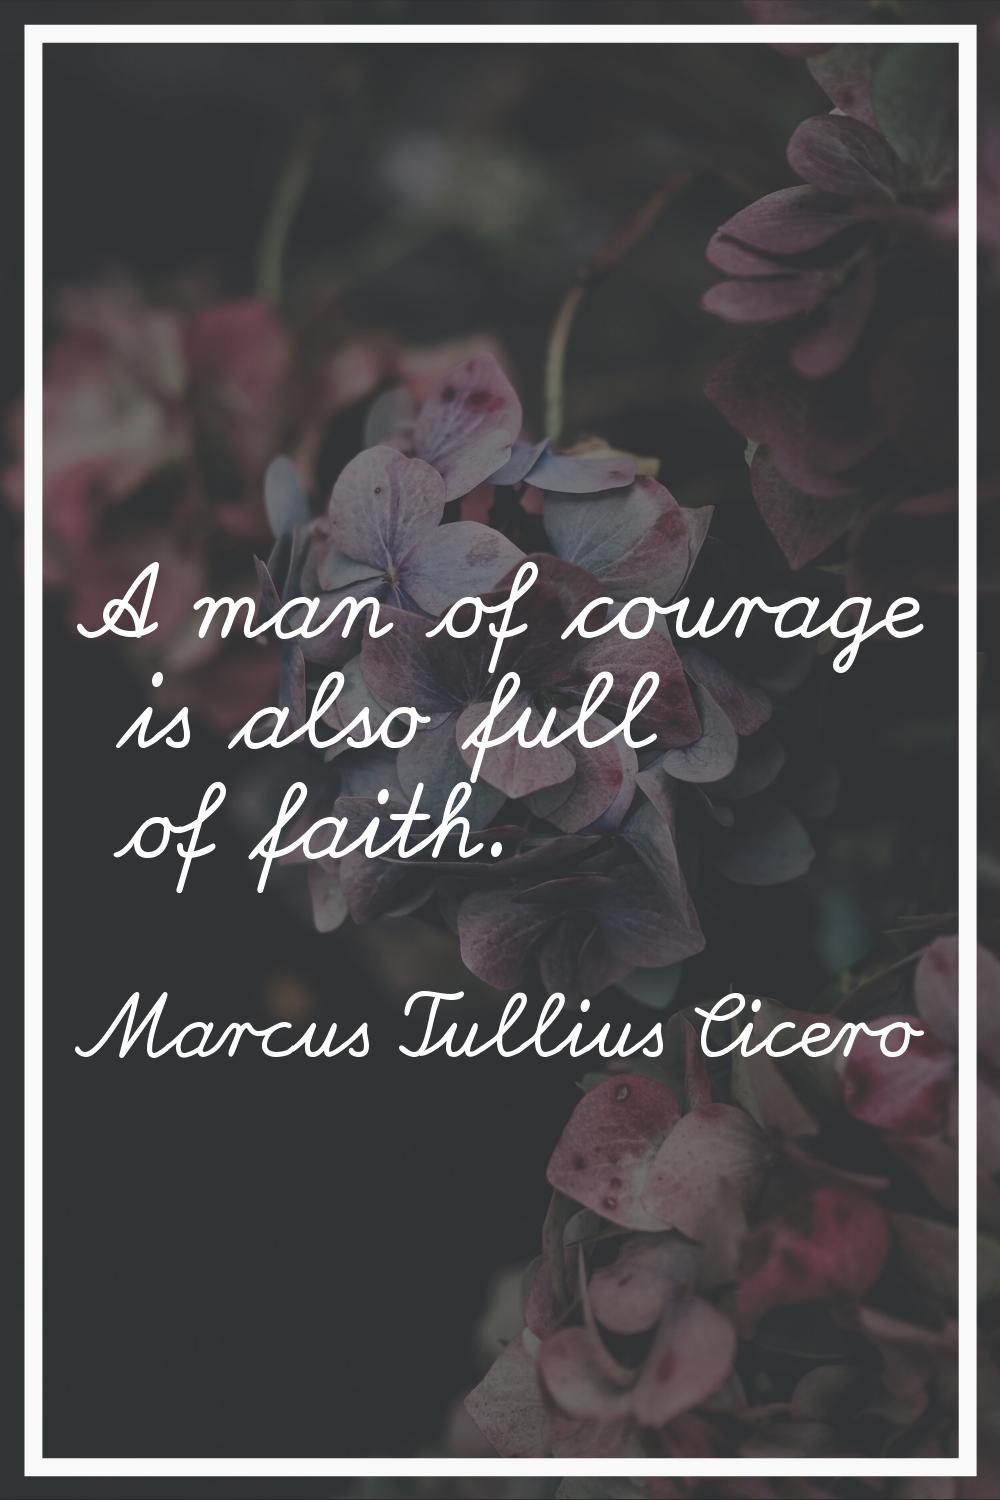 A man of courage is also full of faith.